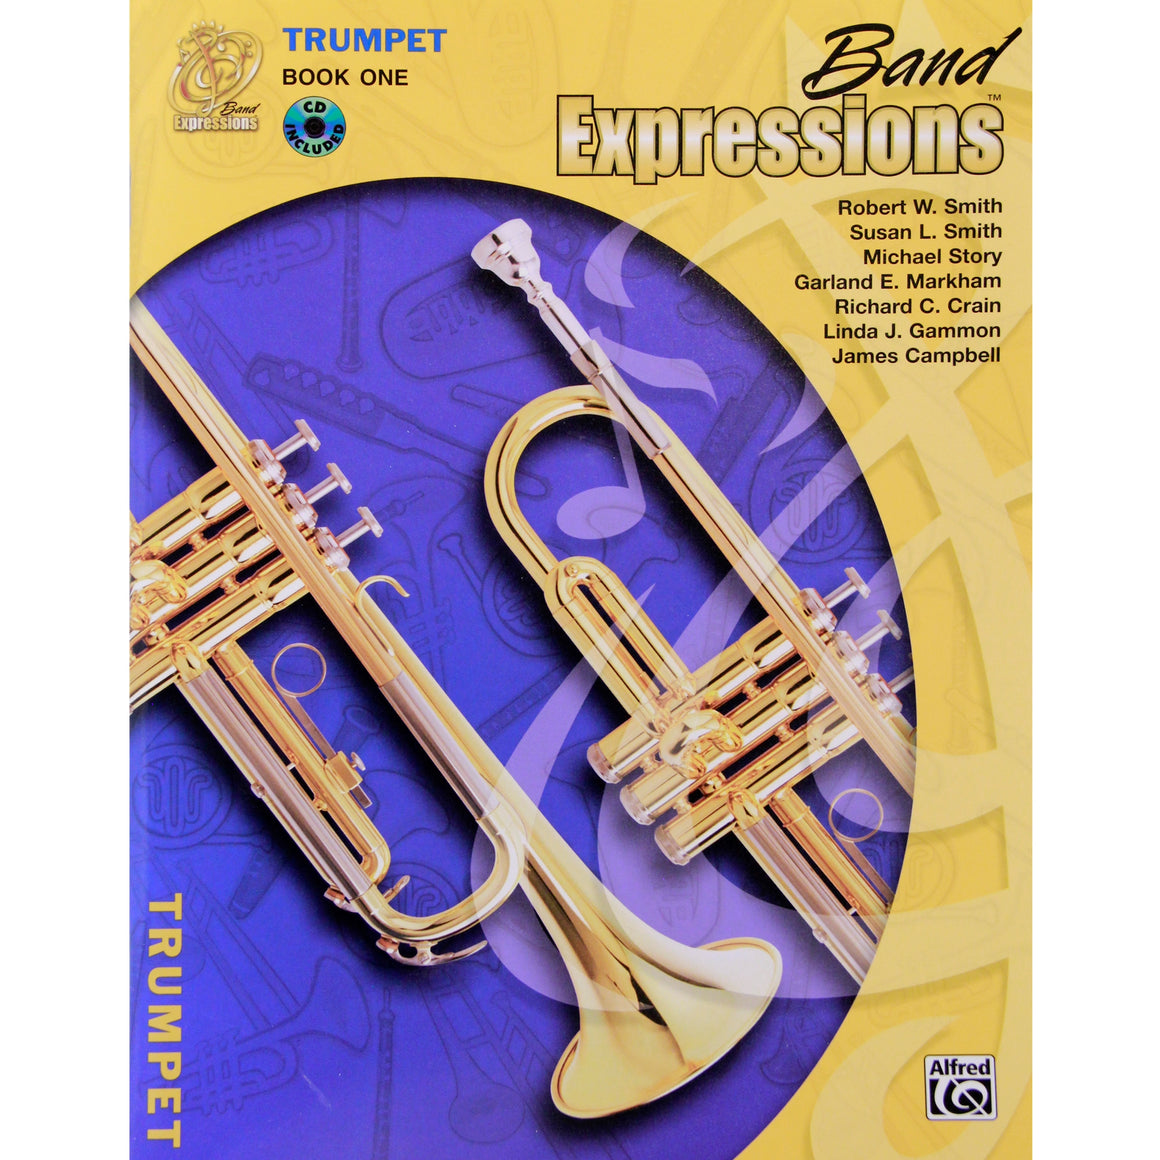 ALFRED 00MCB1011CDX Band Expressions , Book One: Student Edition [Trumpet]